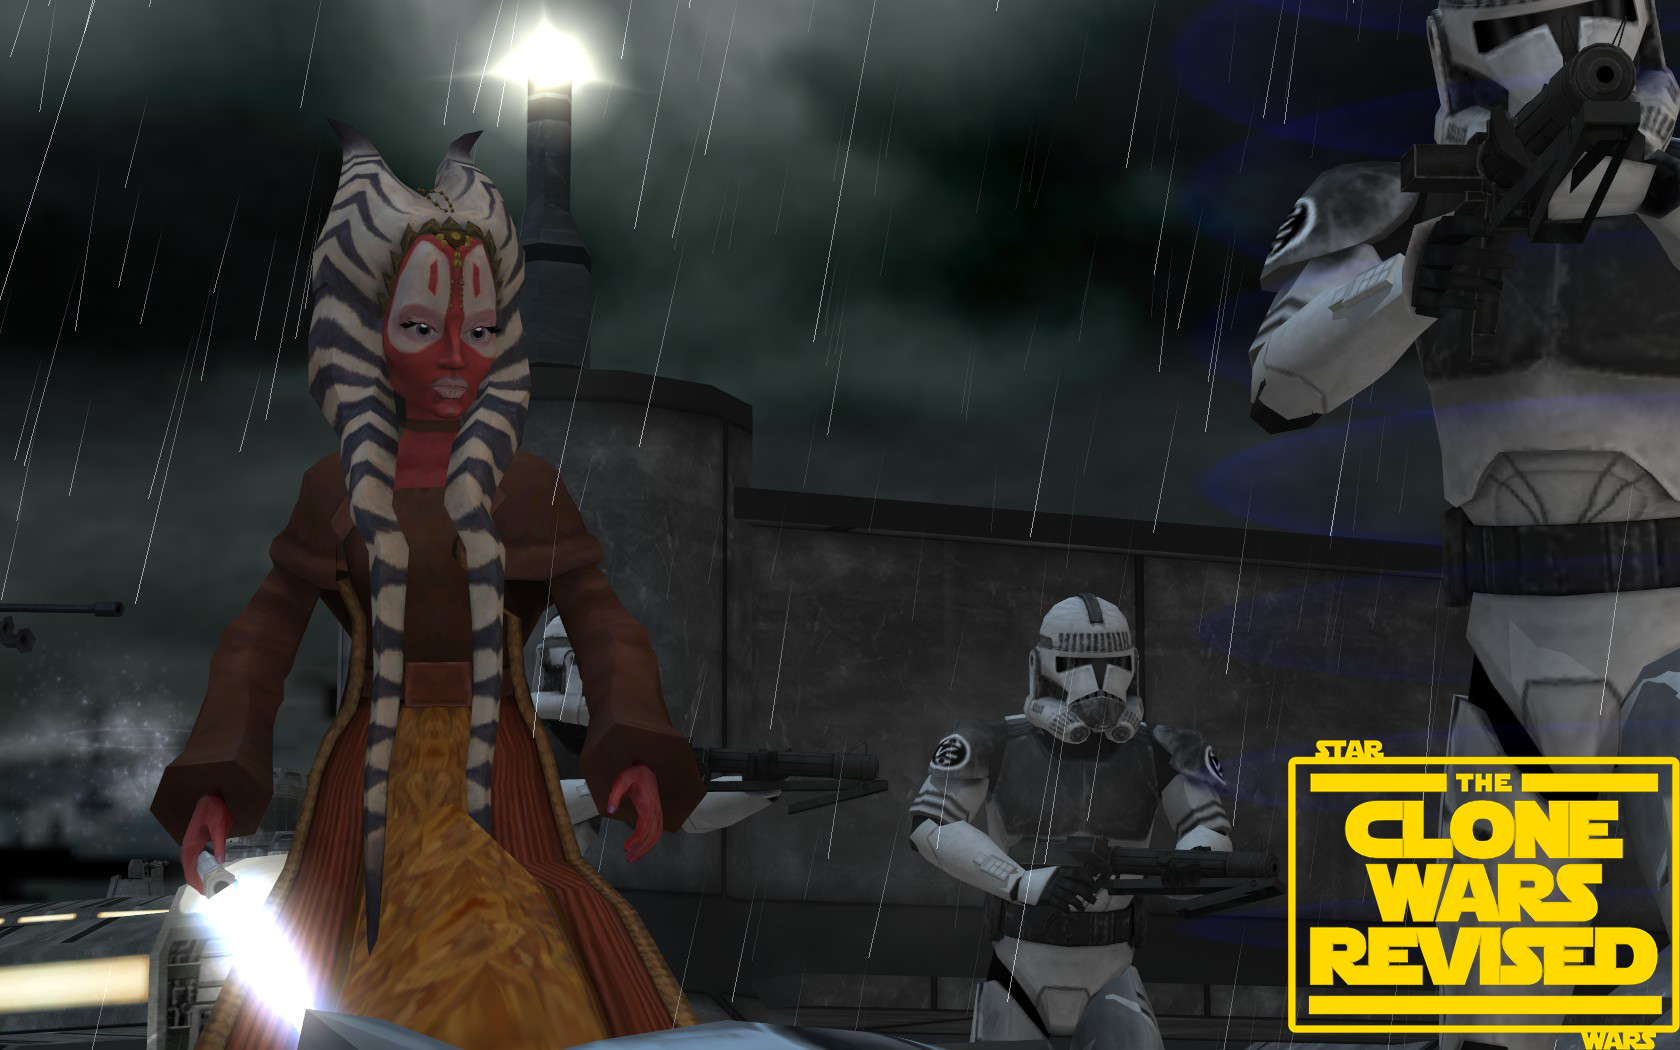 Shaak Ti entered the battlefield! image - The Clone Wars Rev